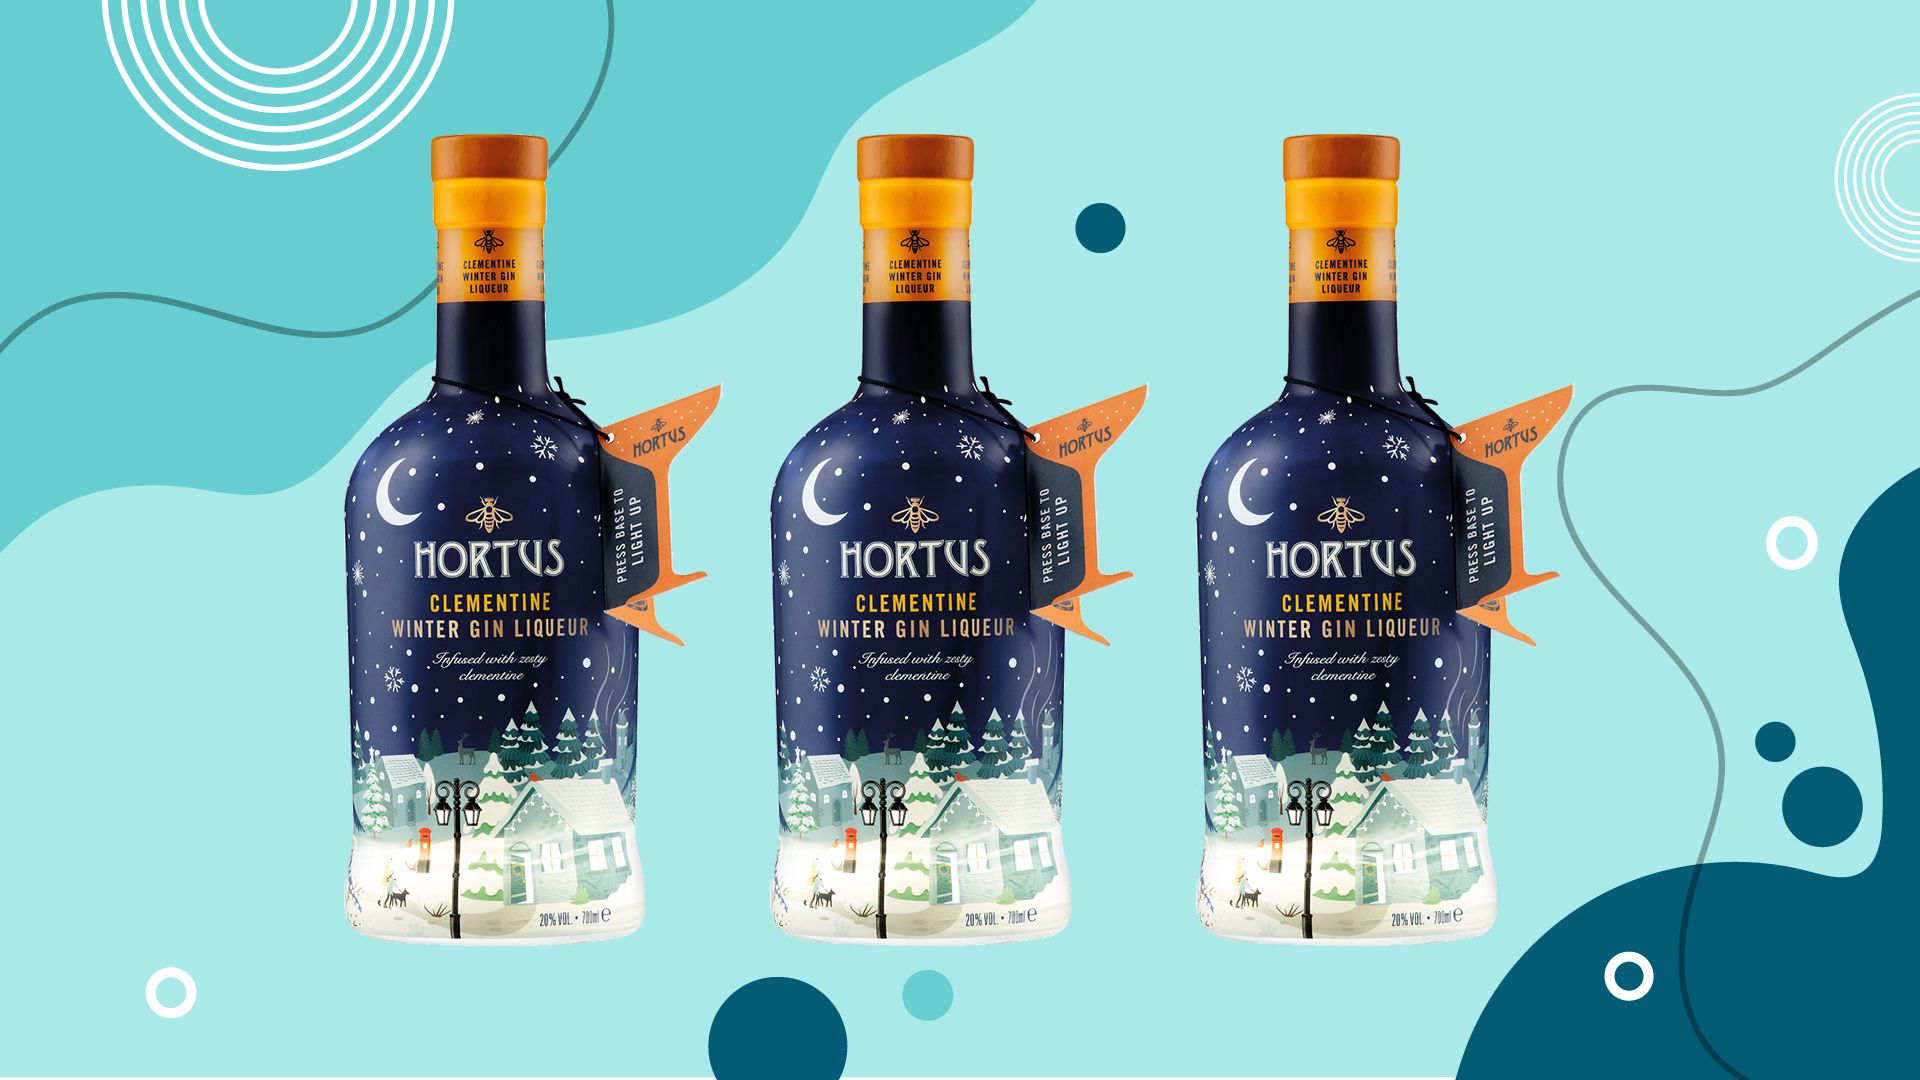 Lidl Launches A Light-Up Christmas Gin For